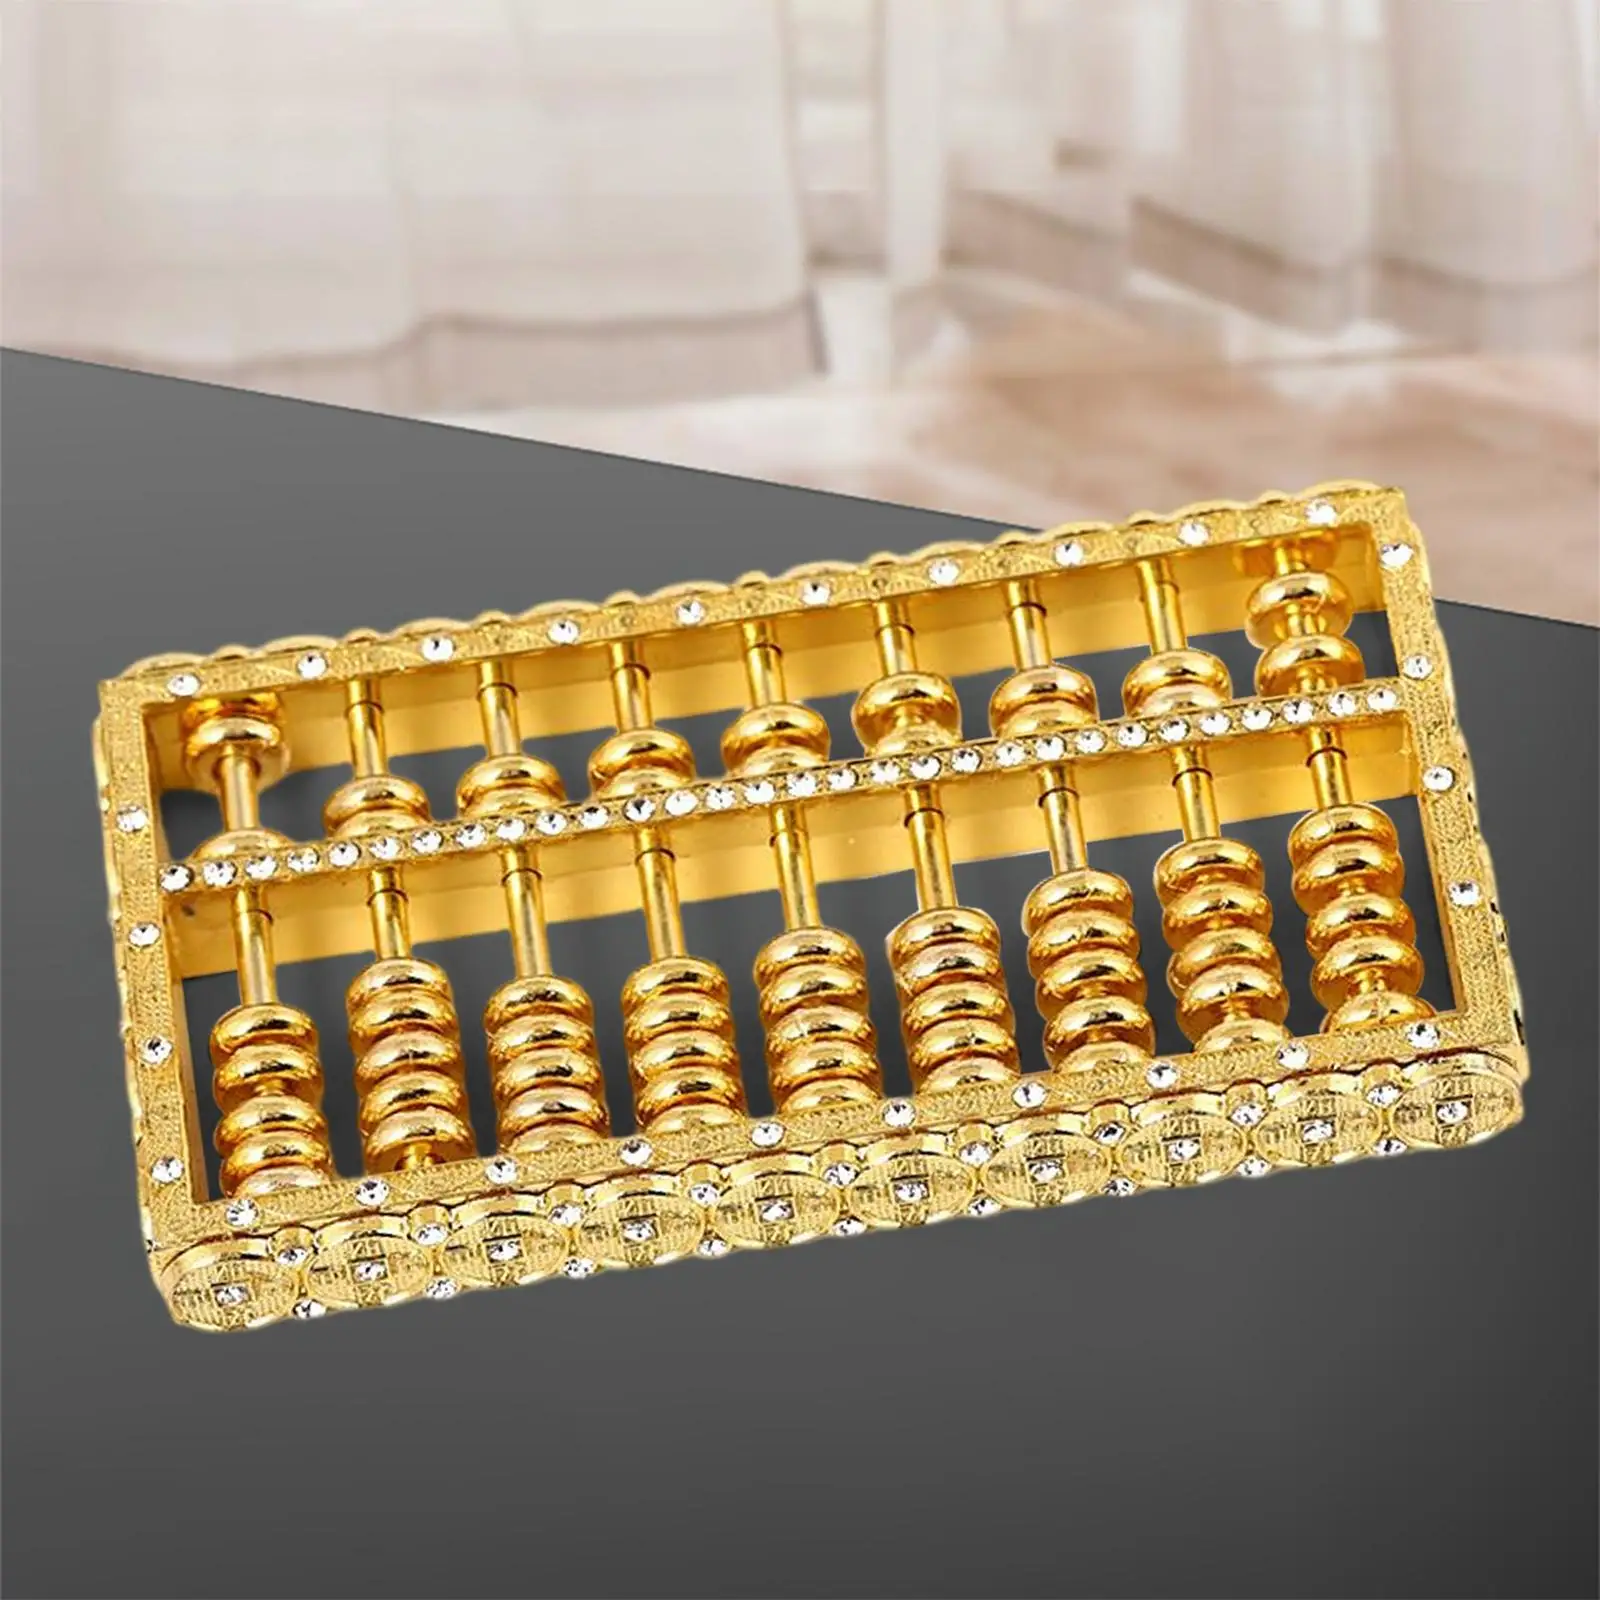 Fashion Abacus Decoration Ancient China Calculate Beads Toy Alloy Mini Counting Bead Abacus for Gift Desktop Ornaments Men Women